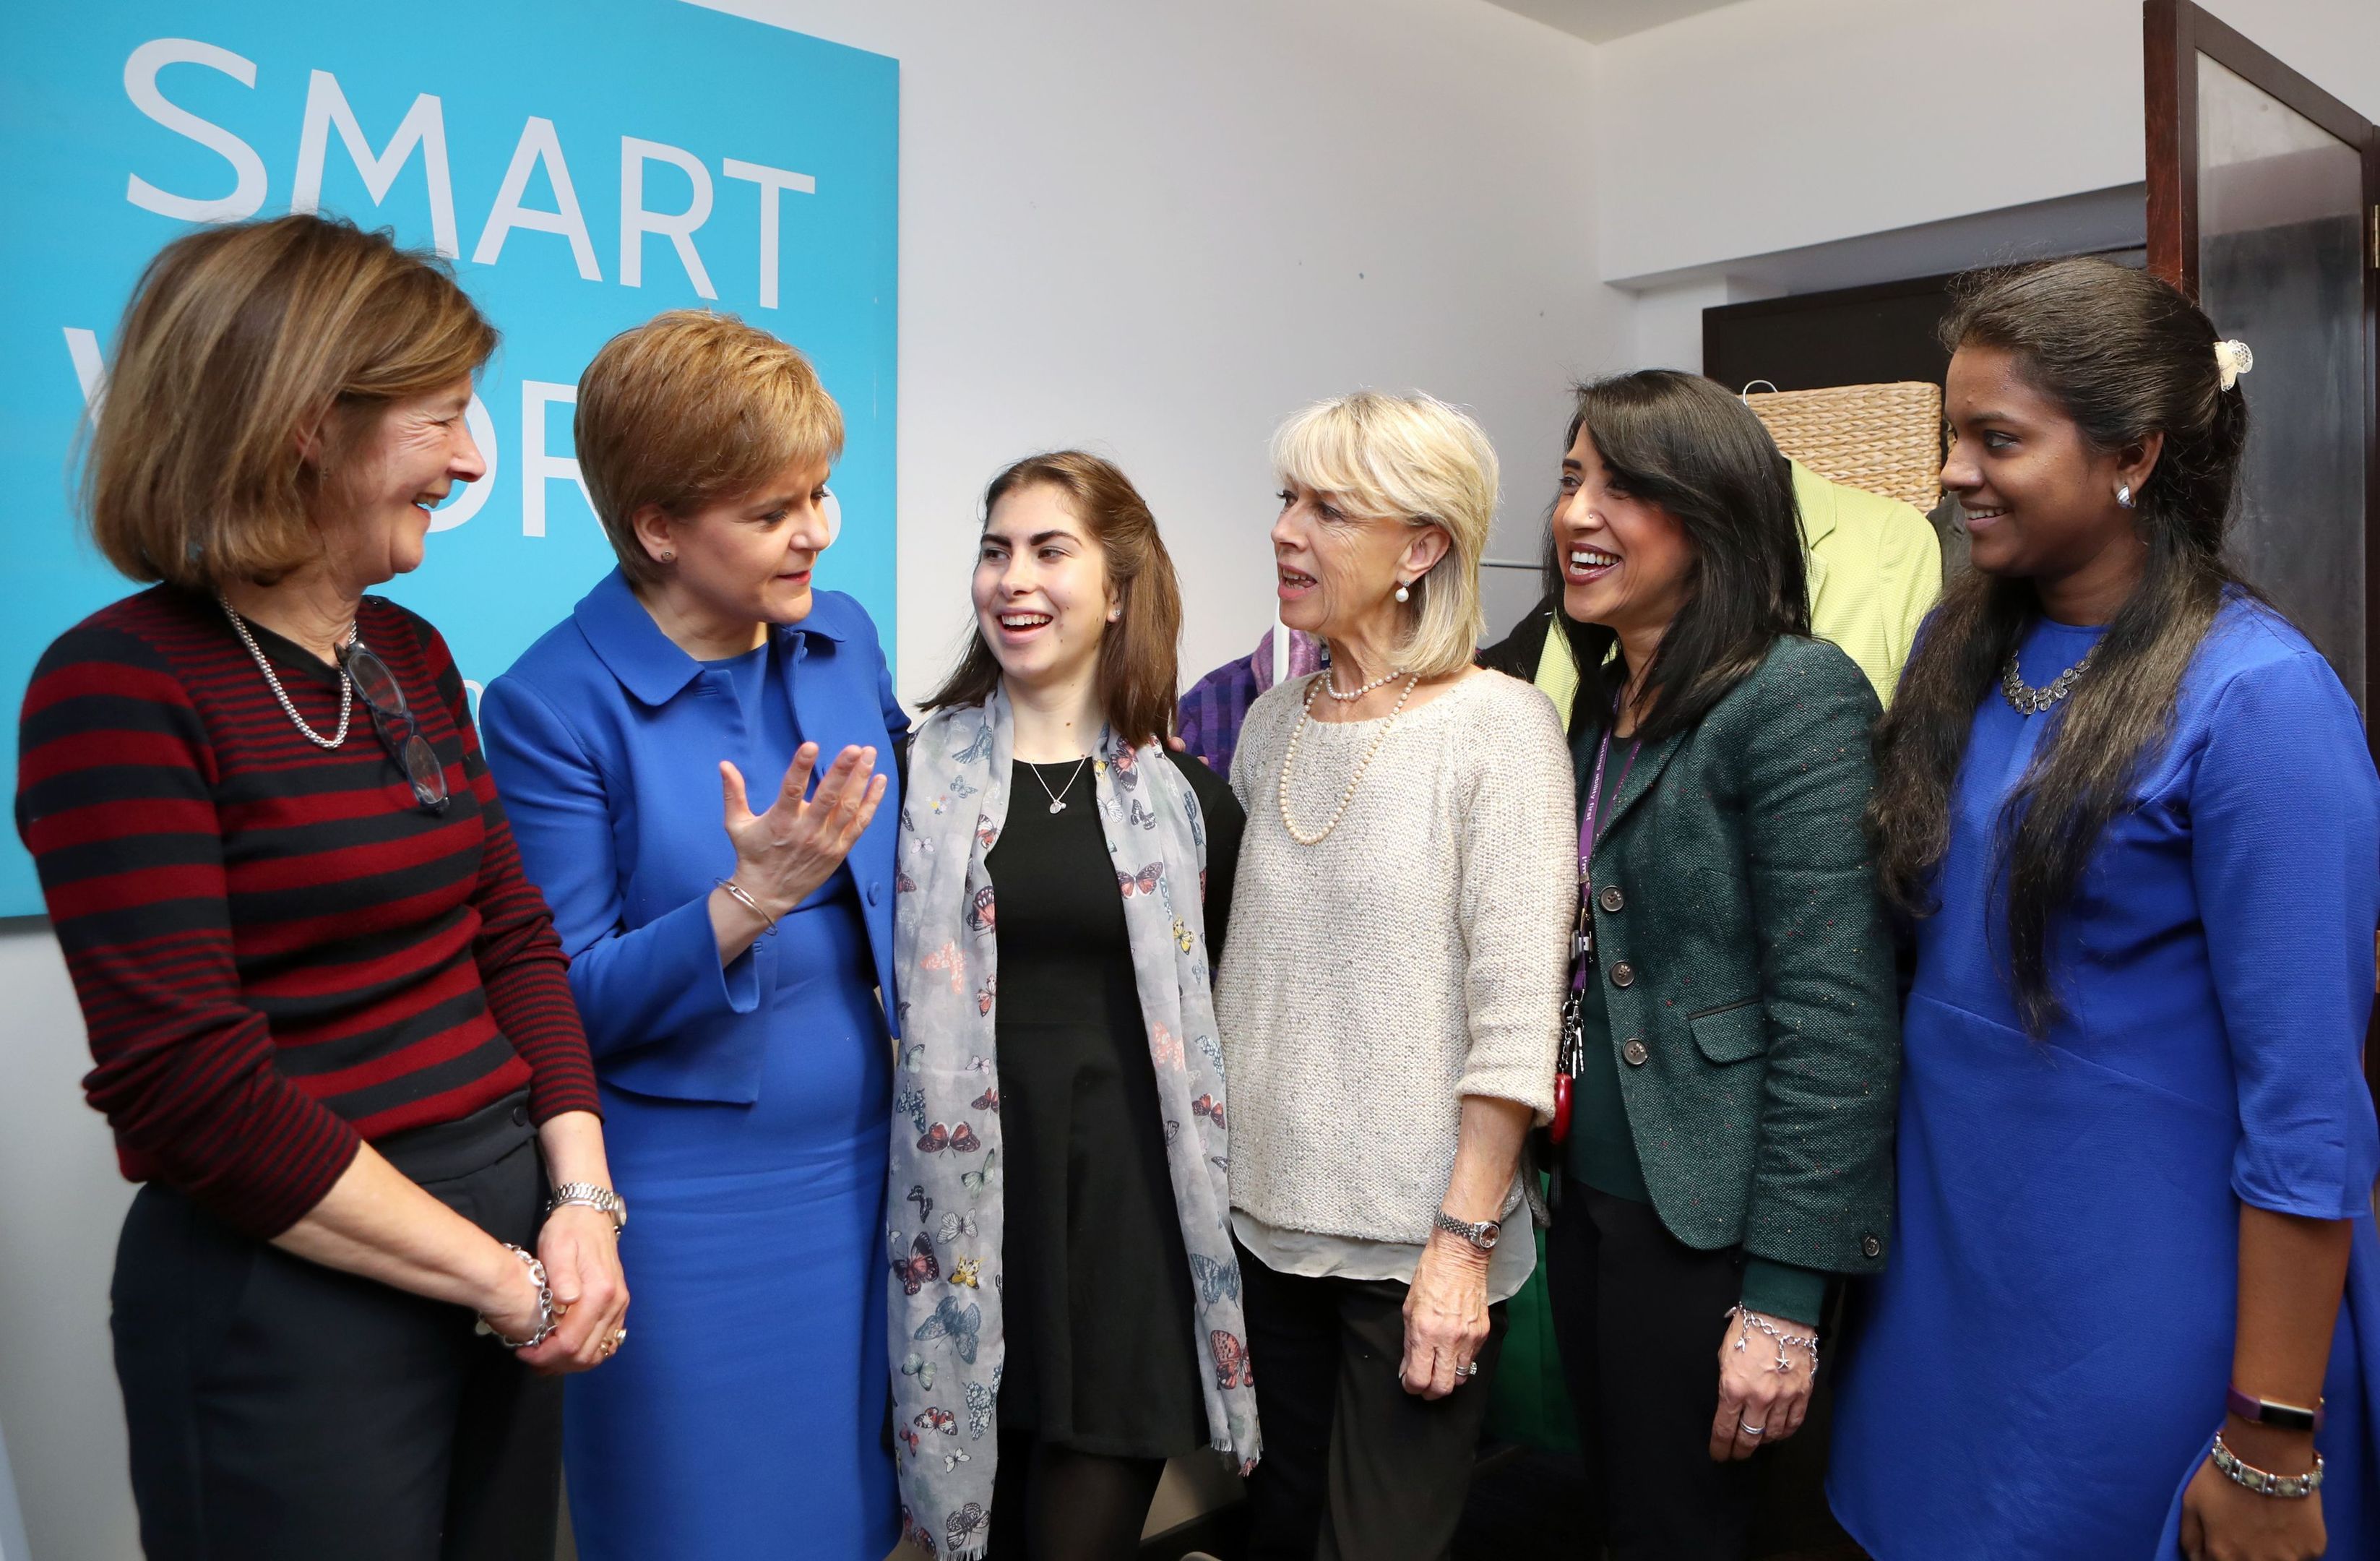 First Minister Nicola Sturgeon (second left) meets staff and volunteers at Smart Works in Edinburgh for an event to mark International Women’s Day (Jane Barlow/PA Wire)